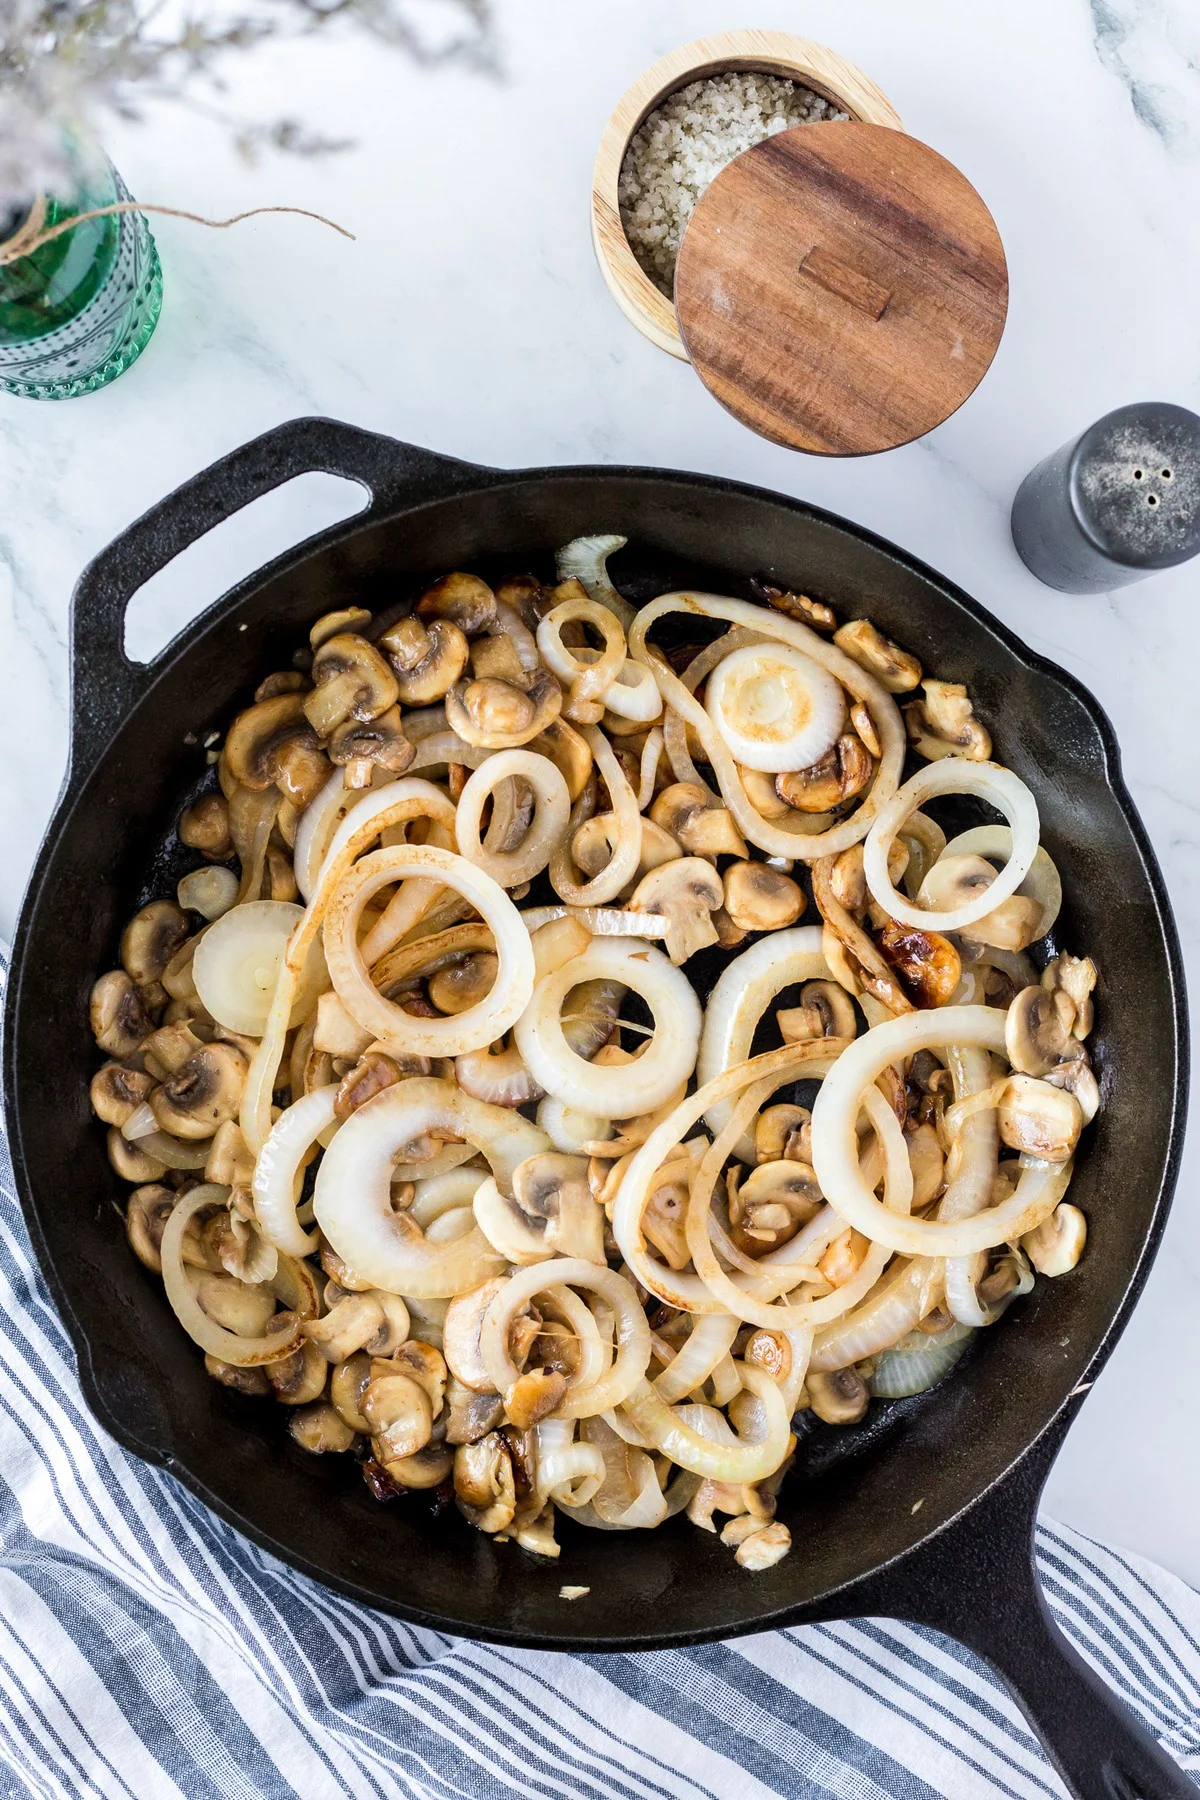 sautéing onions and mushrooms in a skillet